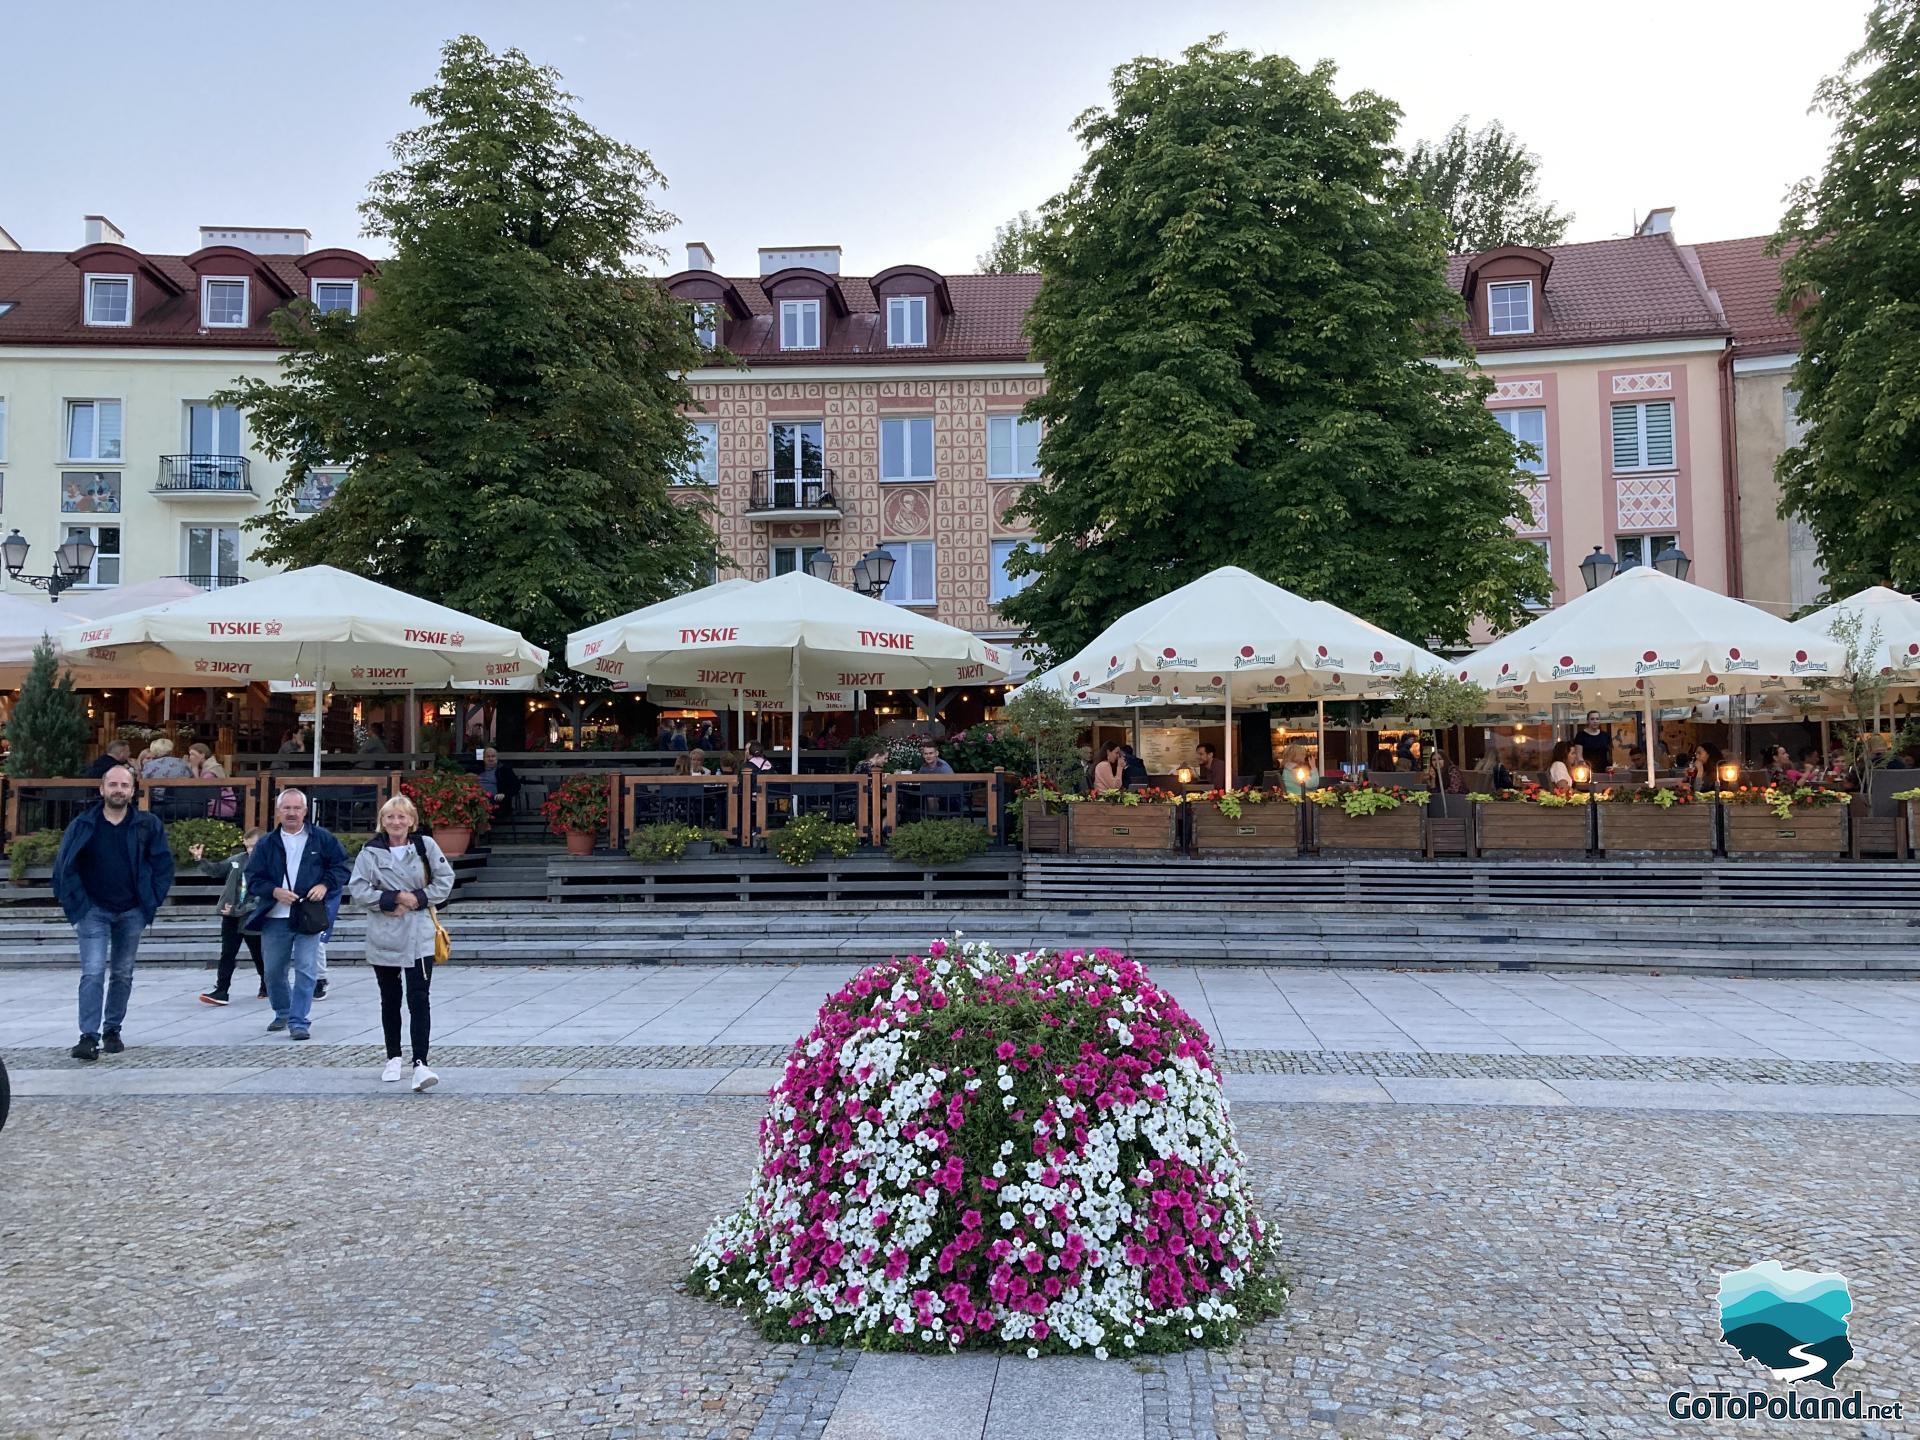 the family is in the square, in the foreground a pot with white and purple flowers, in the background restaurants with outdoor gardens